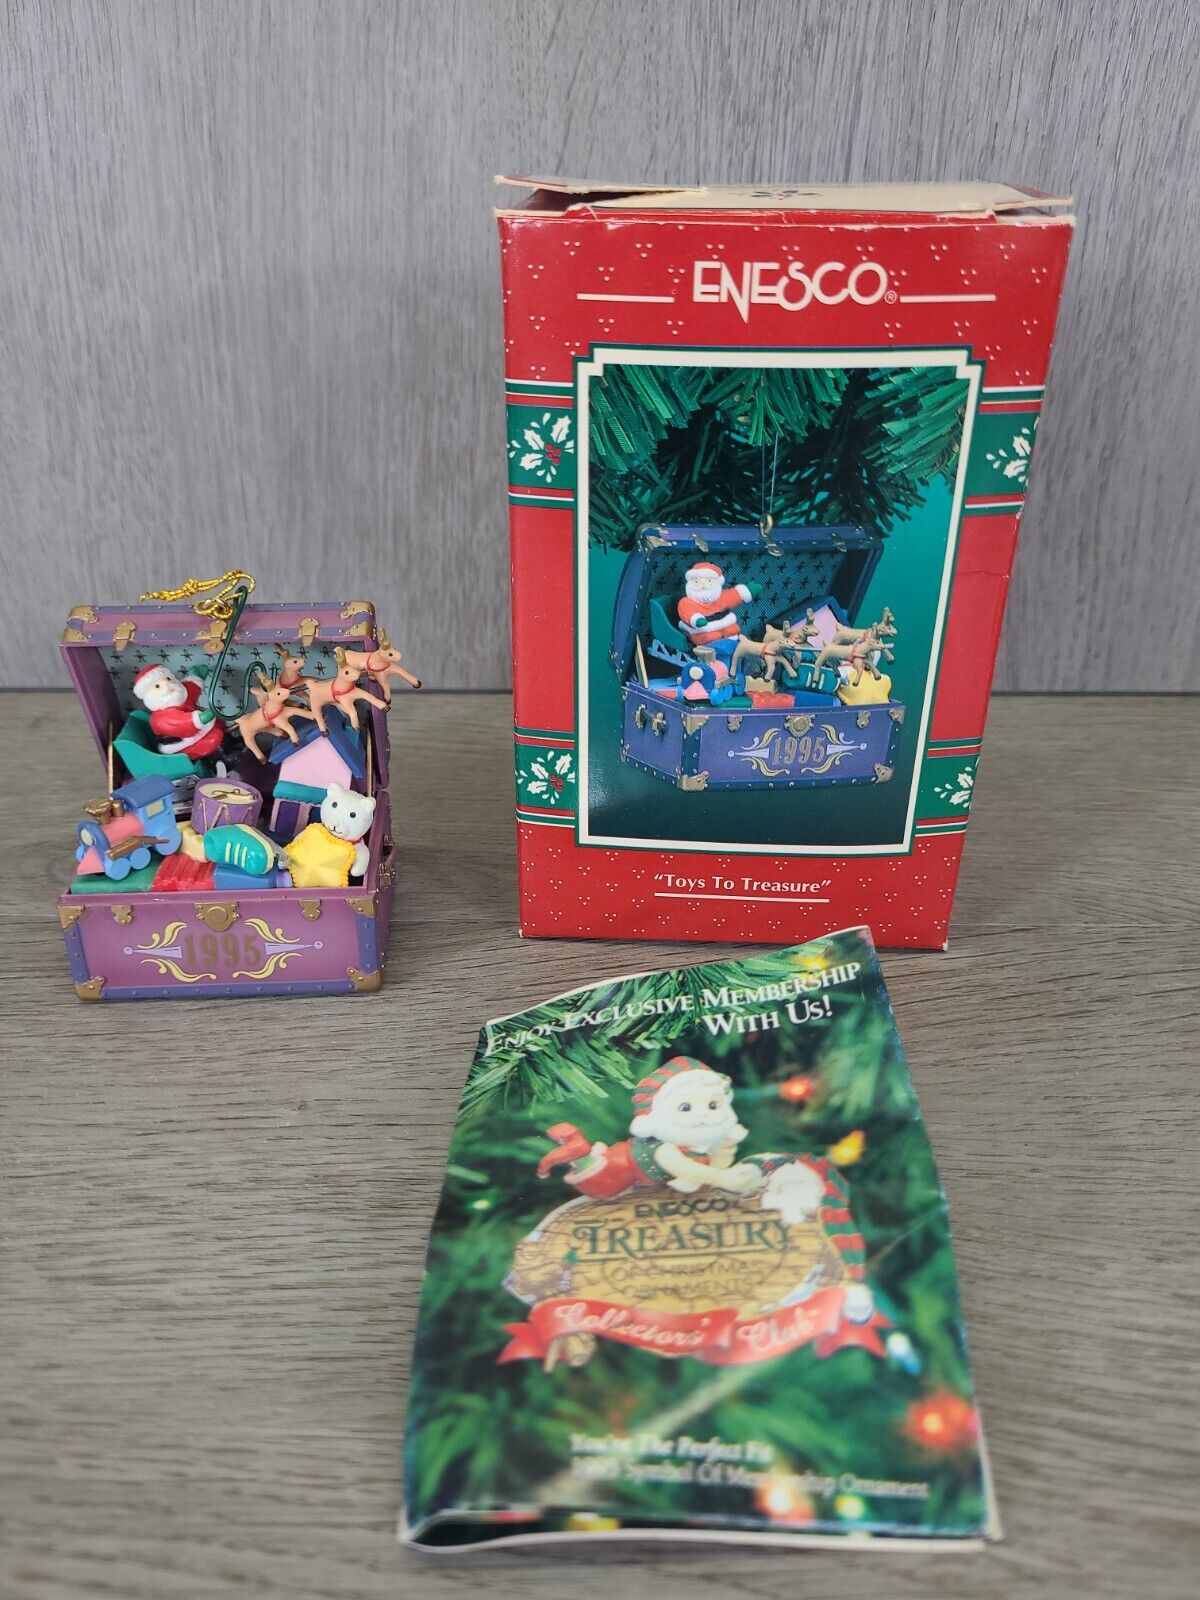 ENESCO 1995 Toys to Treasure 5th in Toy Chest Treasures series Xmas Ornament